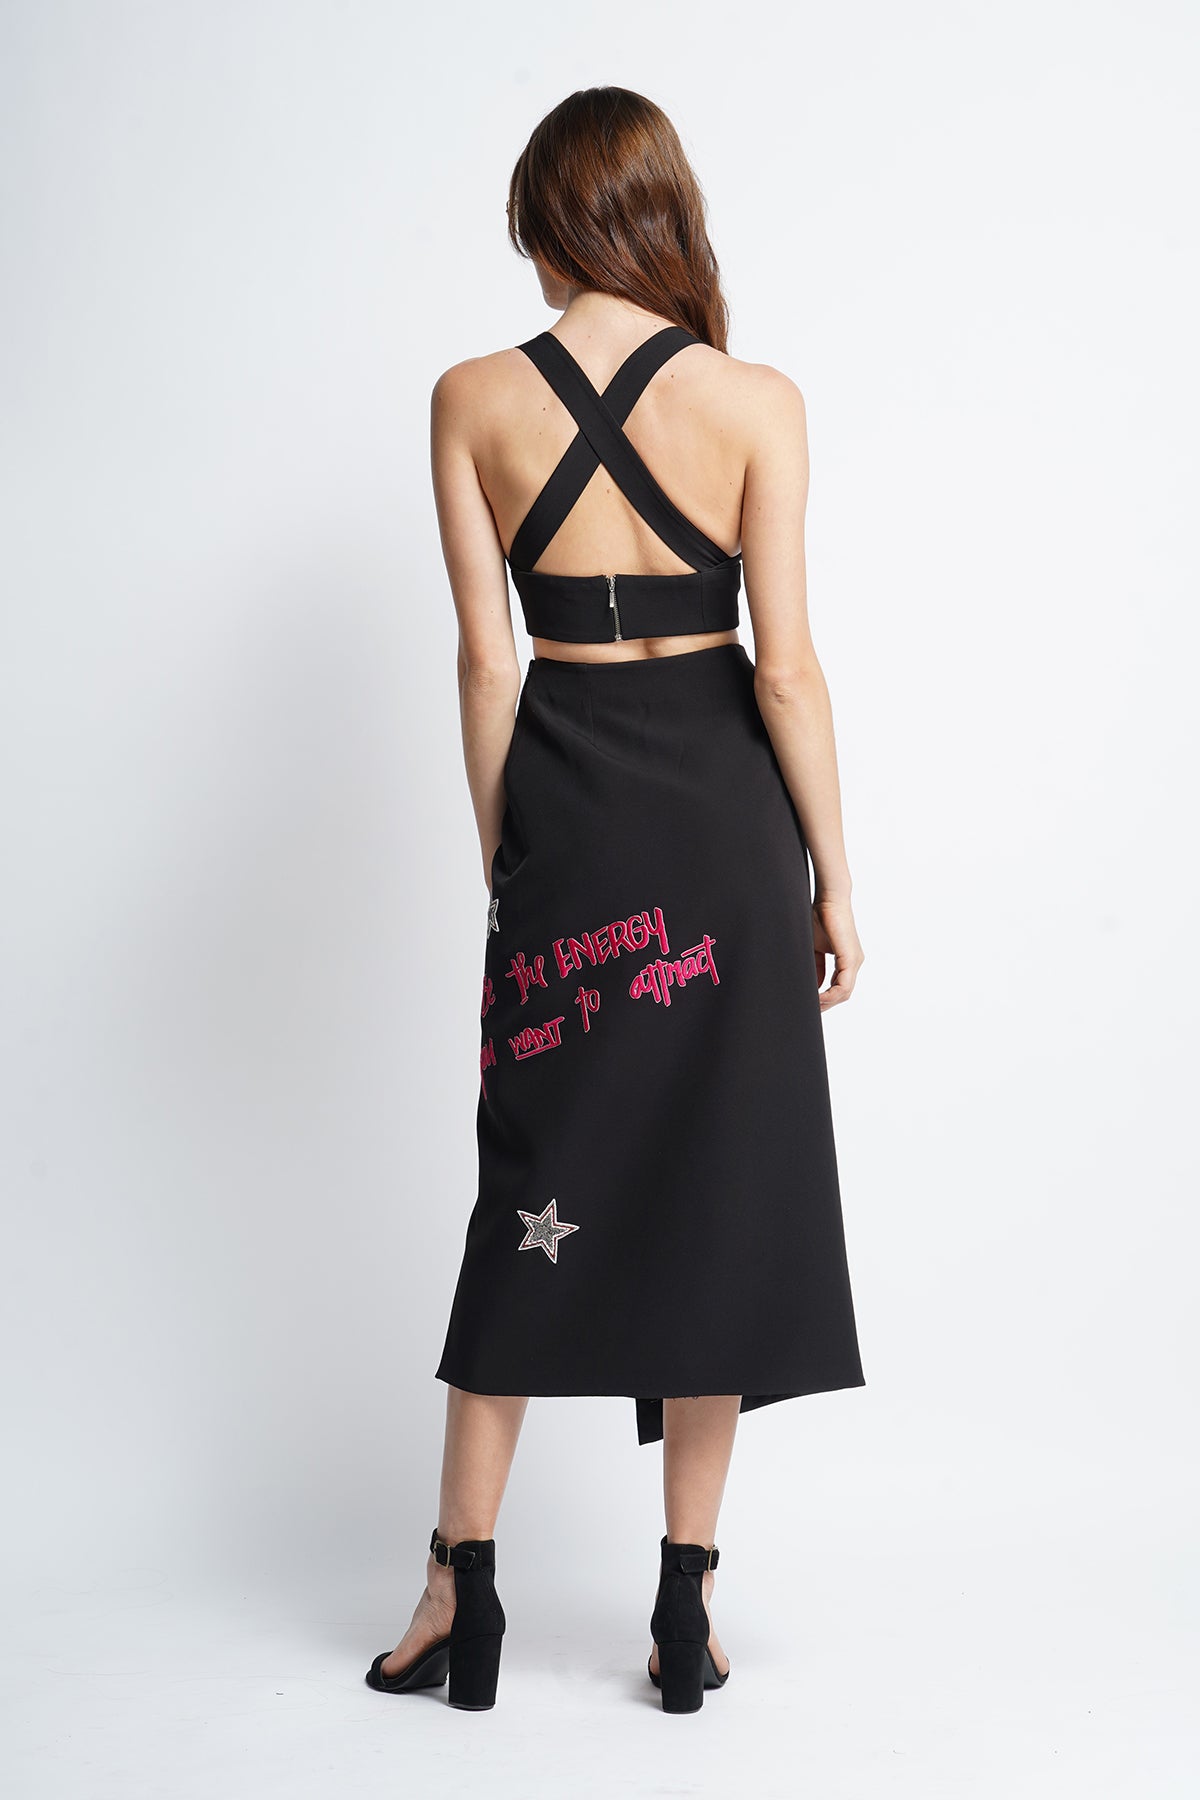 Numbers Text And Dragonfly Wrap Skirt With Bralette Top